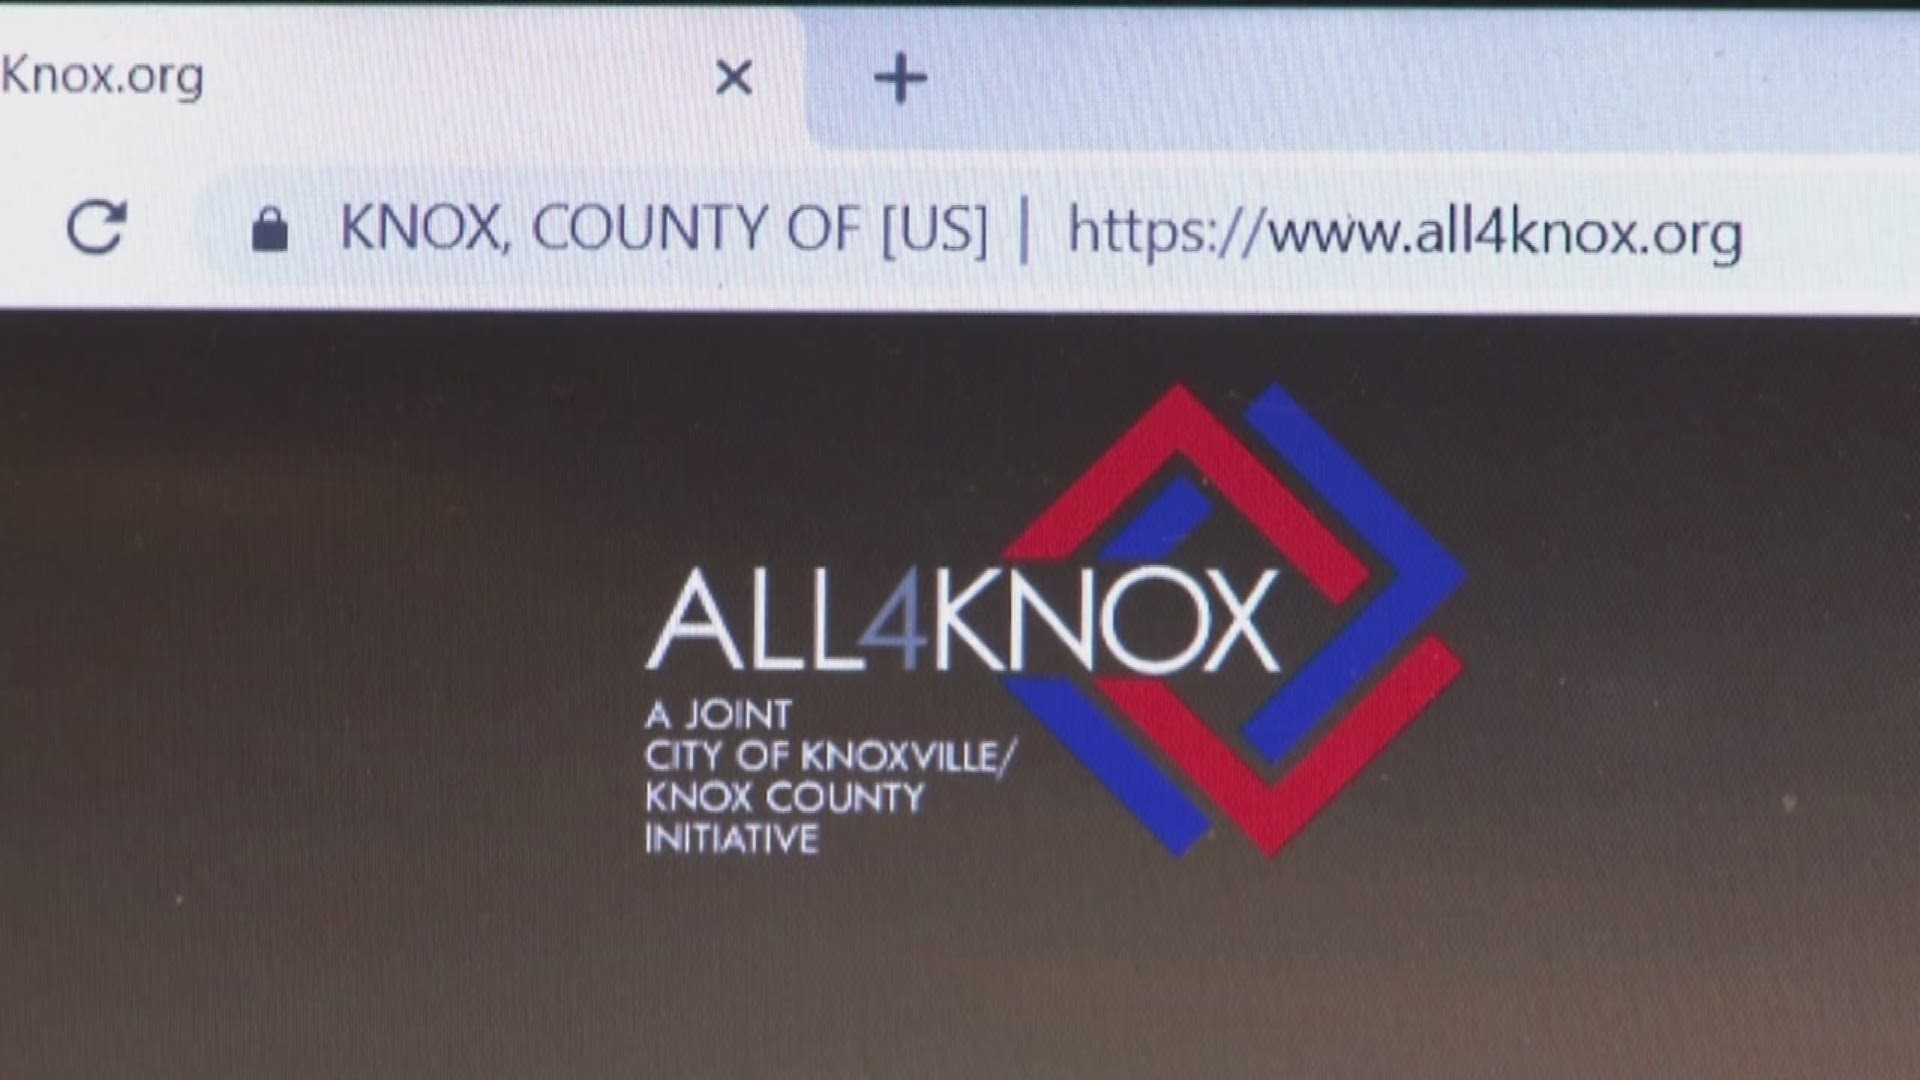 Knoxville and Knox County leaders have partnered on a website hoping to raise more awareness about the opioid epidemic.